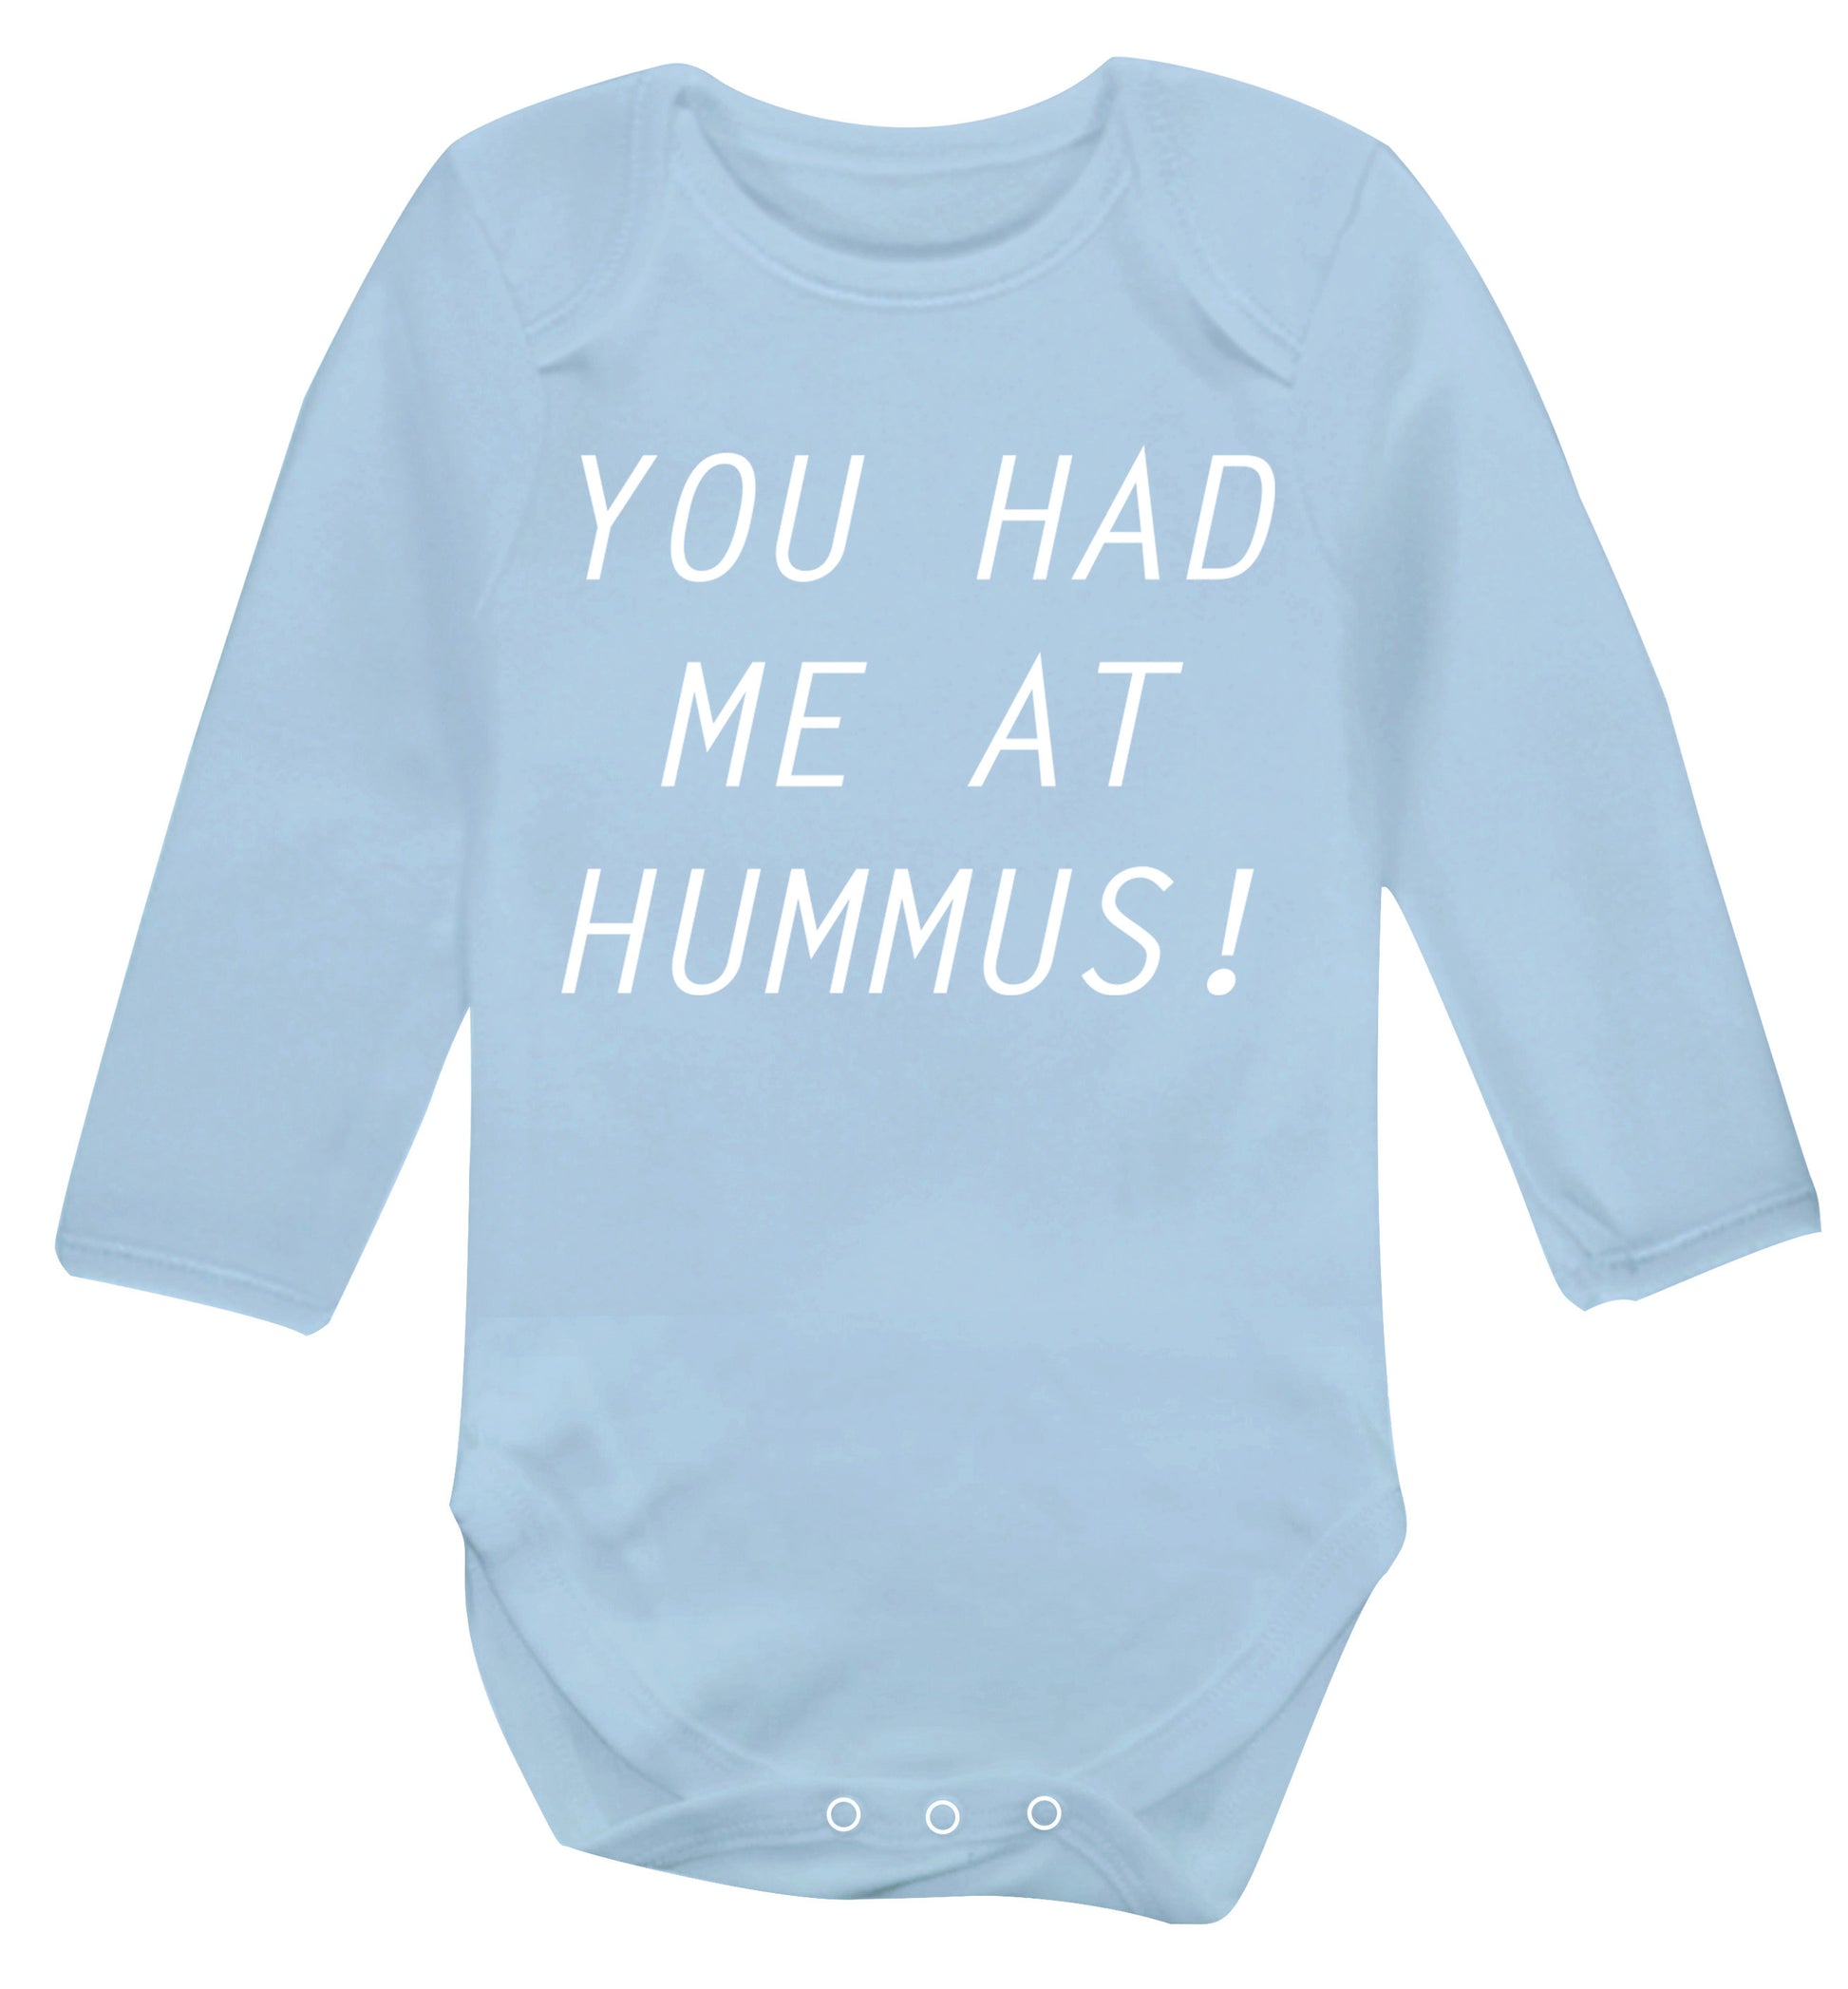 You had me at hummus Baby Vest long sleeved pale blue 6-12 months